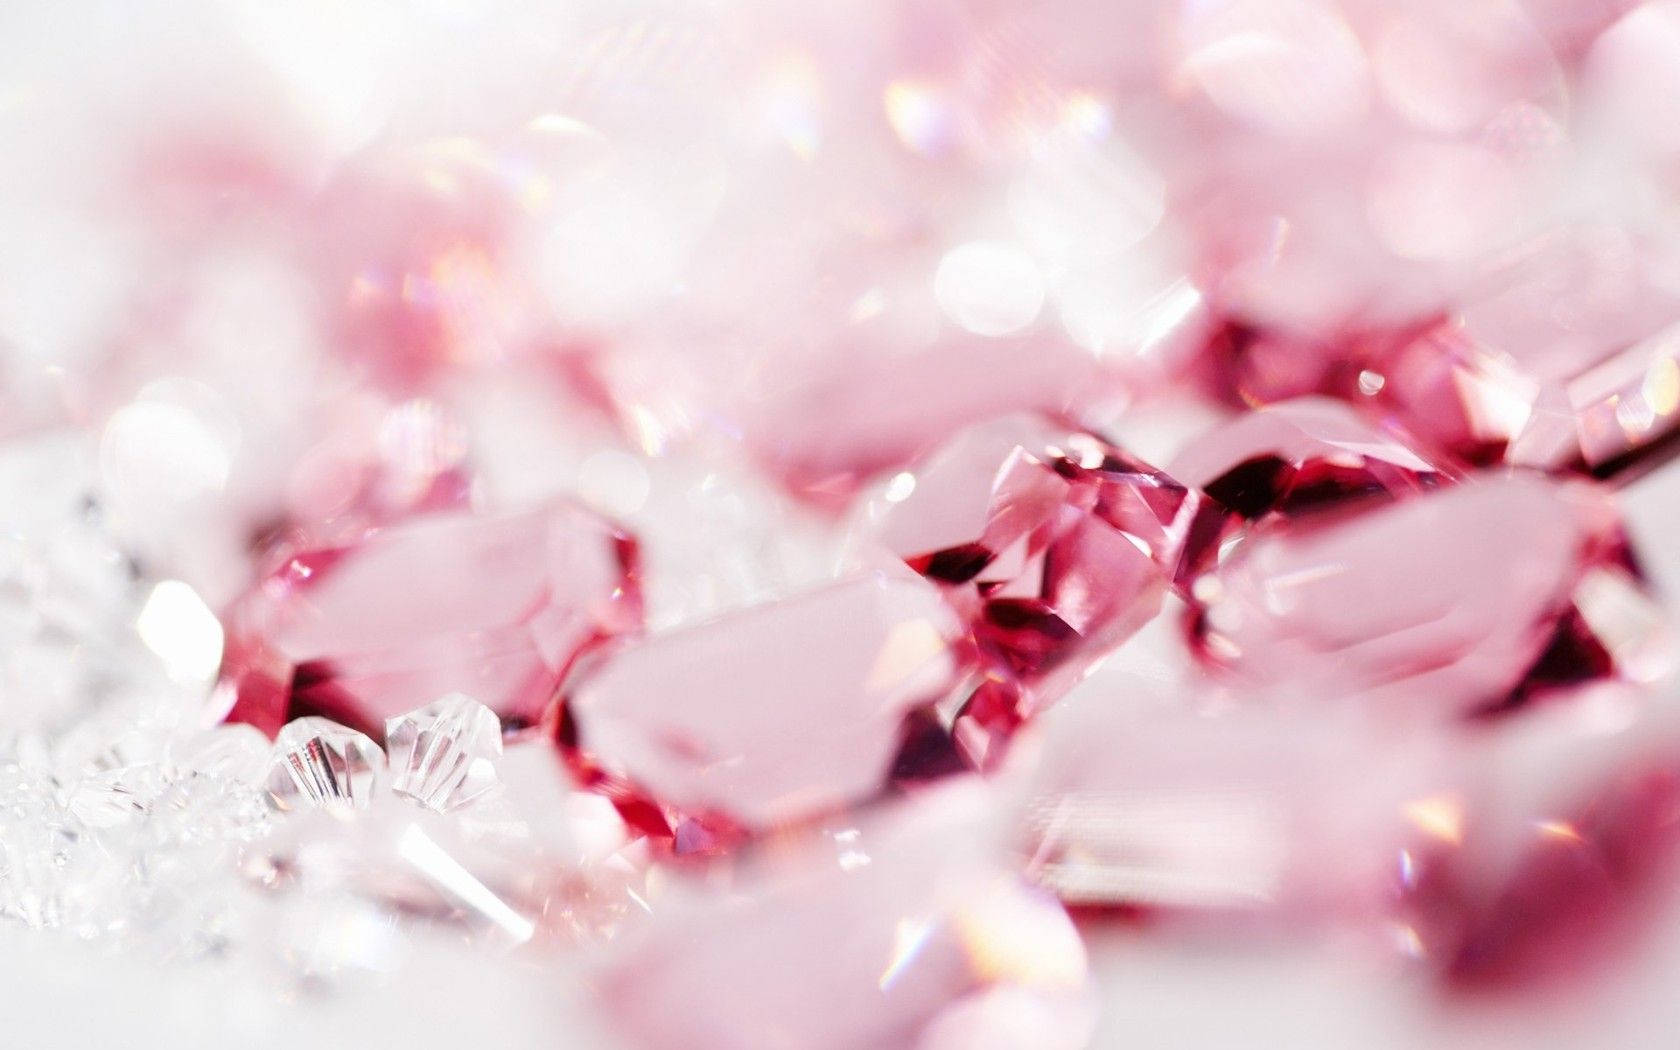 Crystal 1680X1050 Wallpaper and Background Image